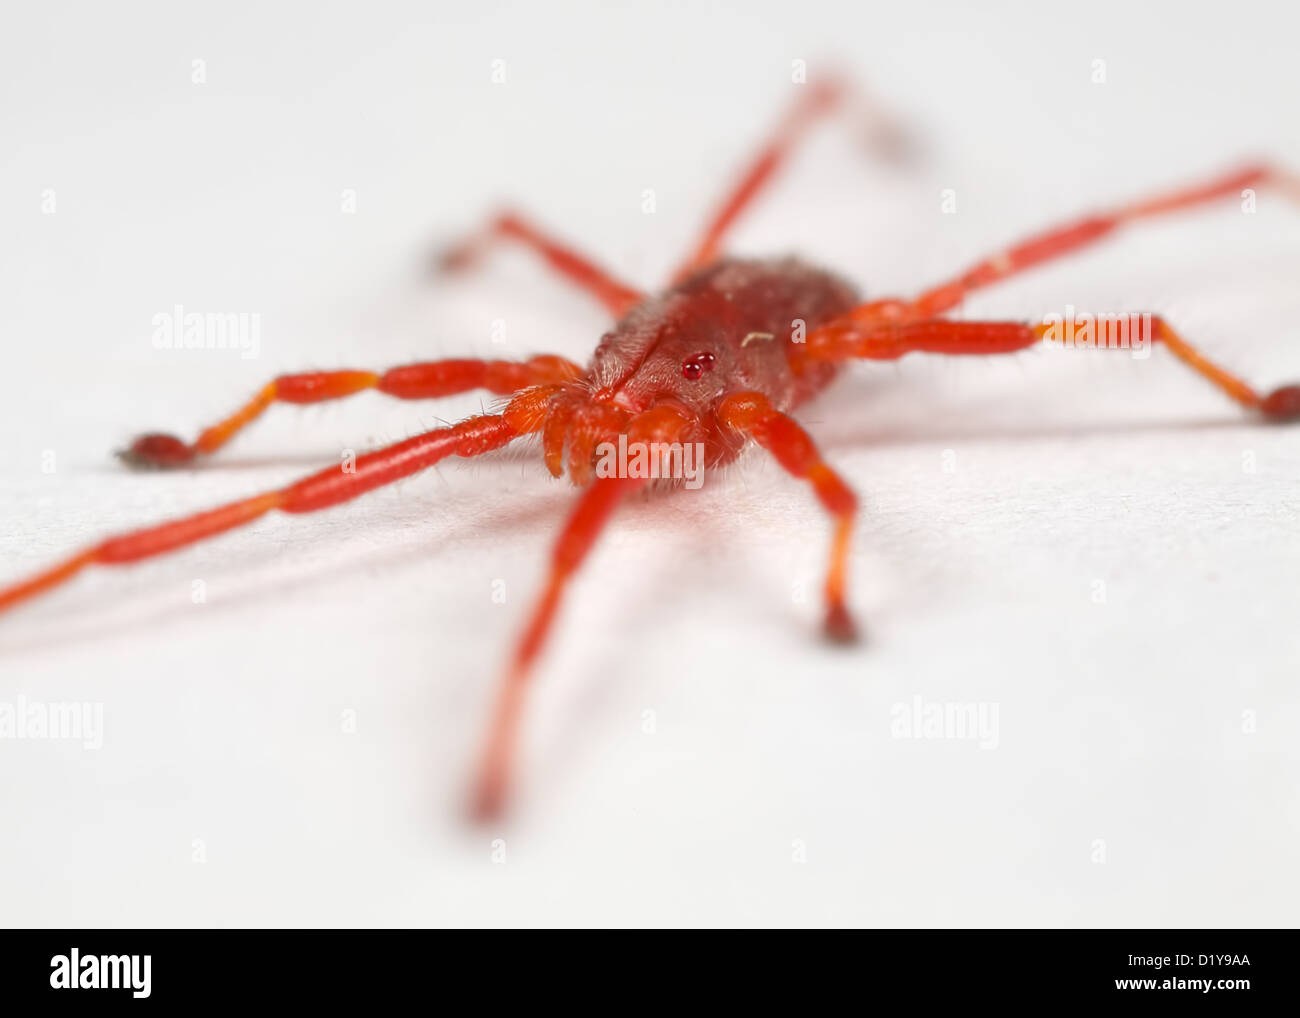 a closeup of a red mite on a white surface Stock Photo